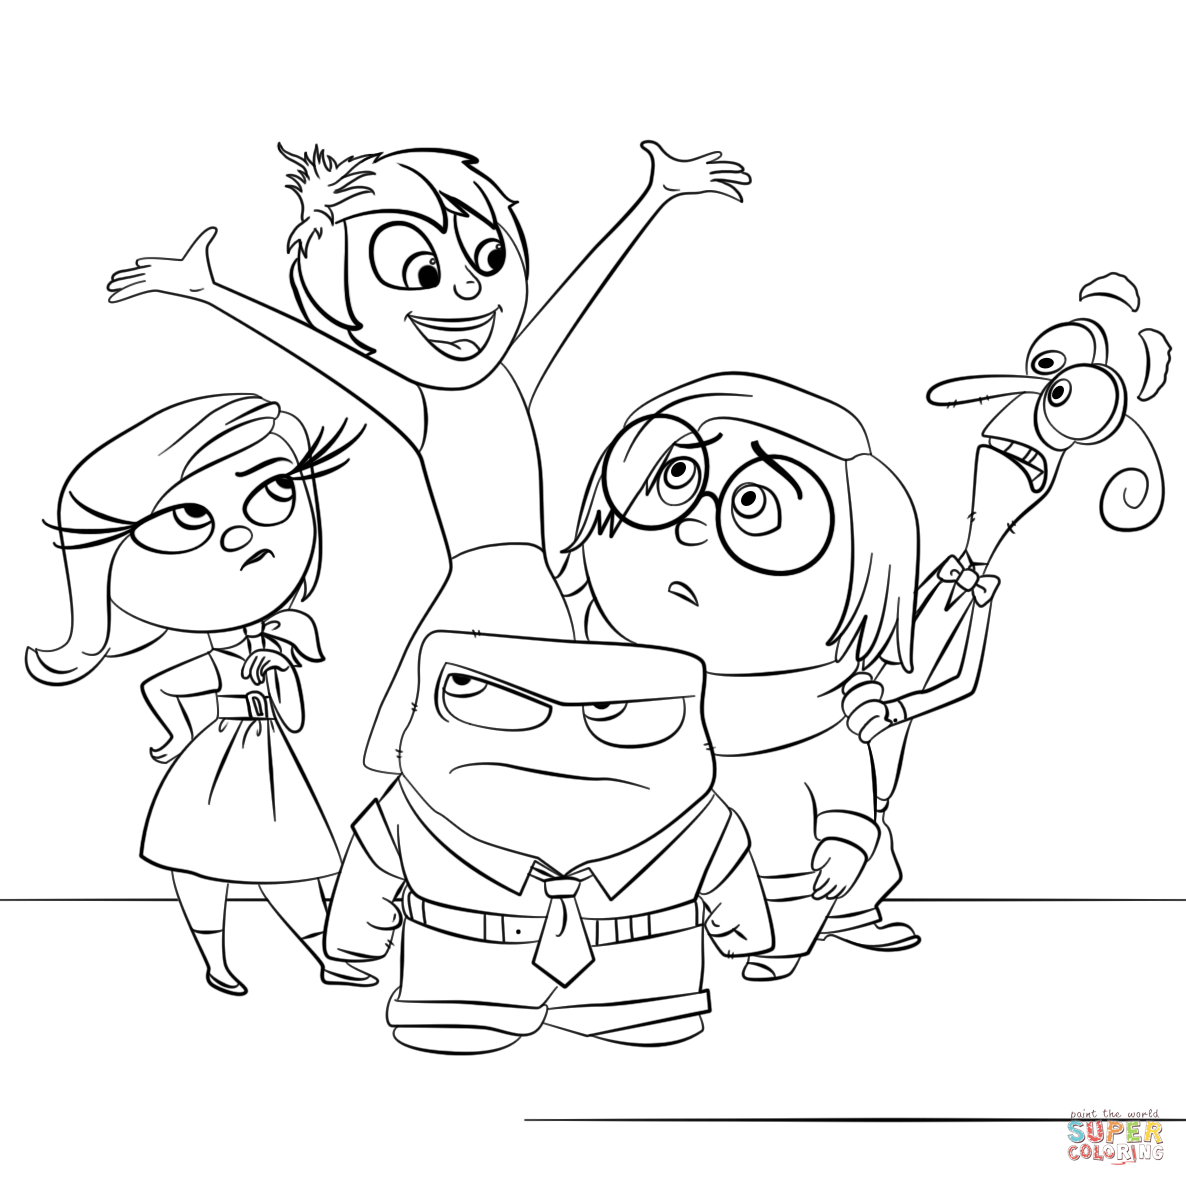 Cartoon People Coloring Pages at GetColorings.com | Free ...